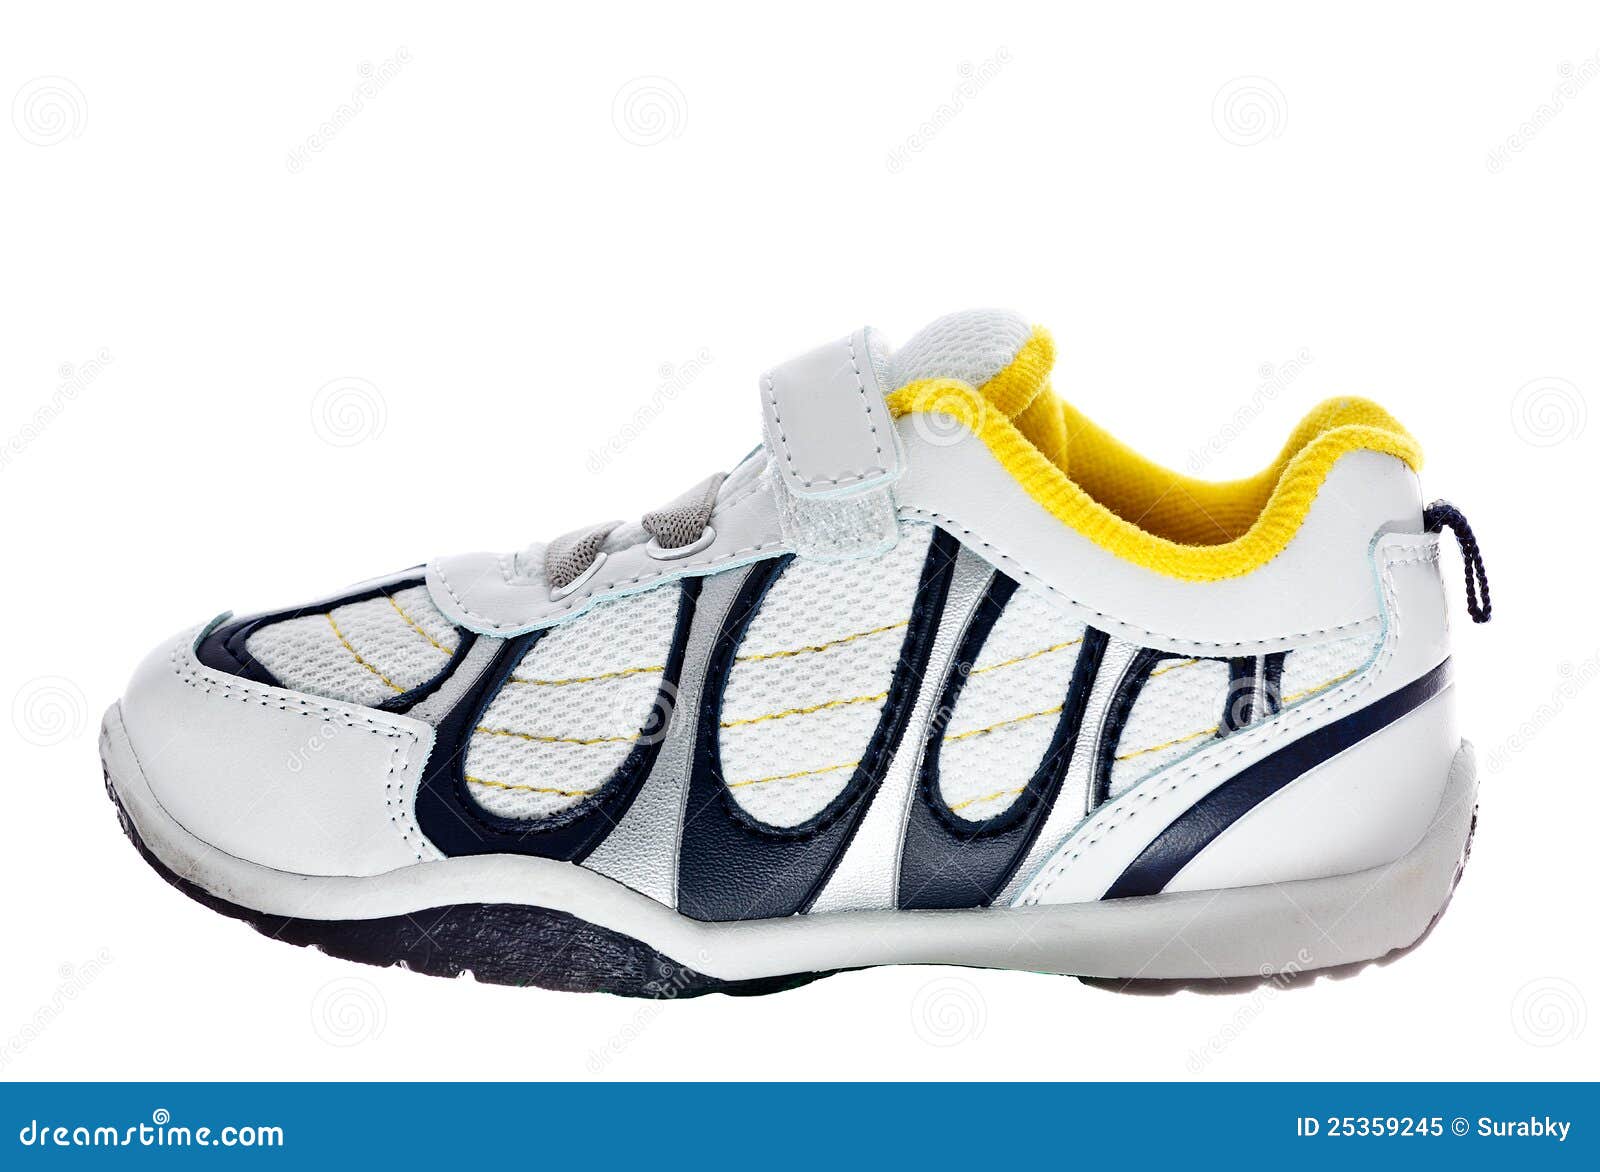 Kid shoes stock image. Image of shoelace, summer, color - 25359245